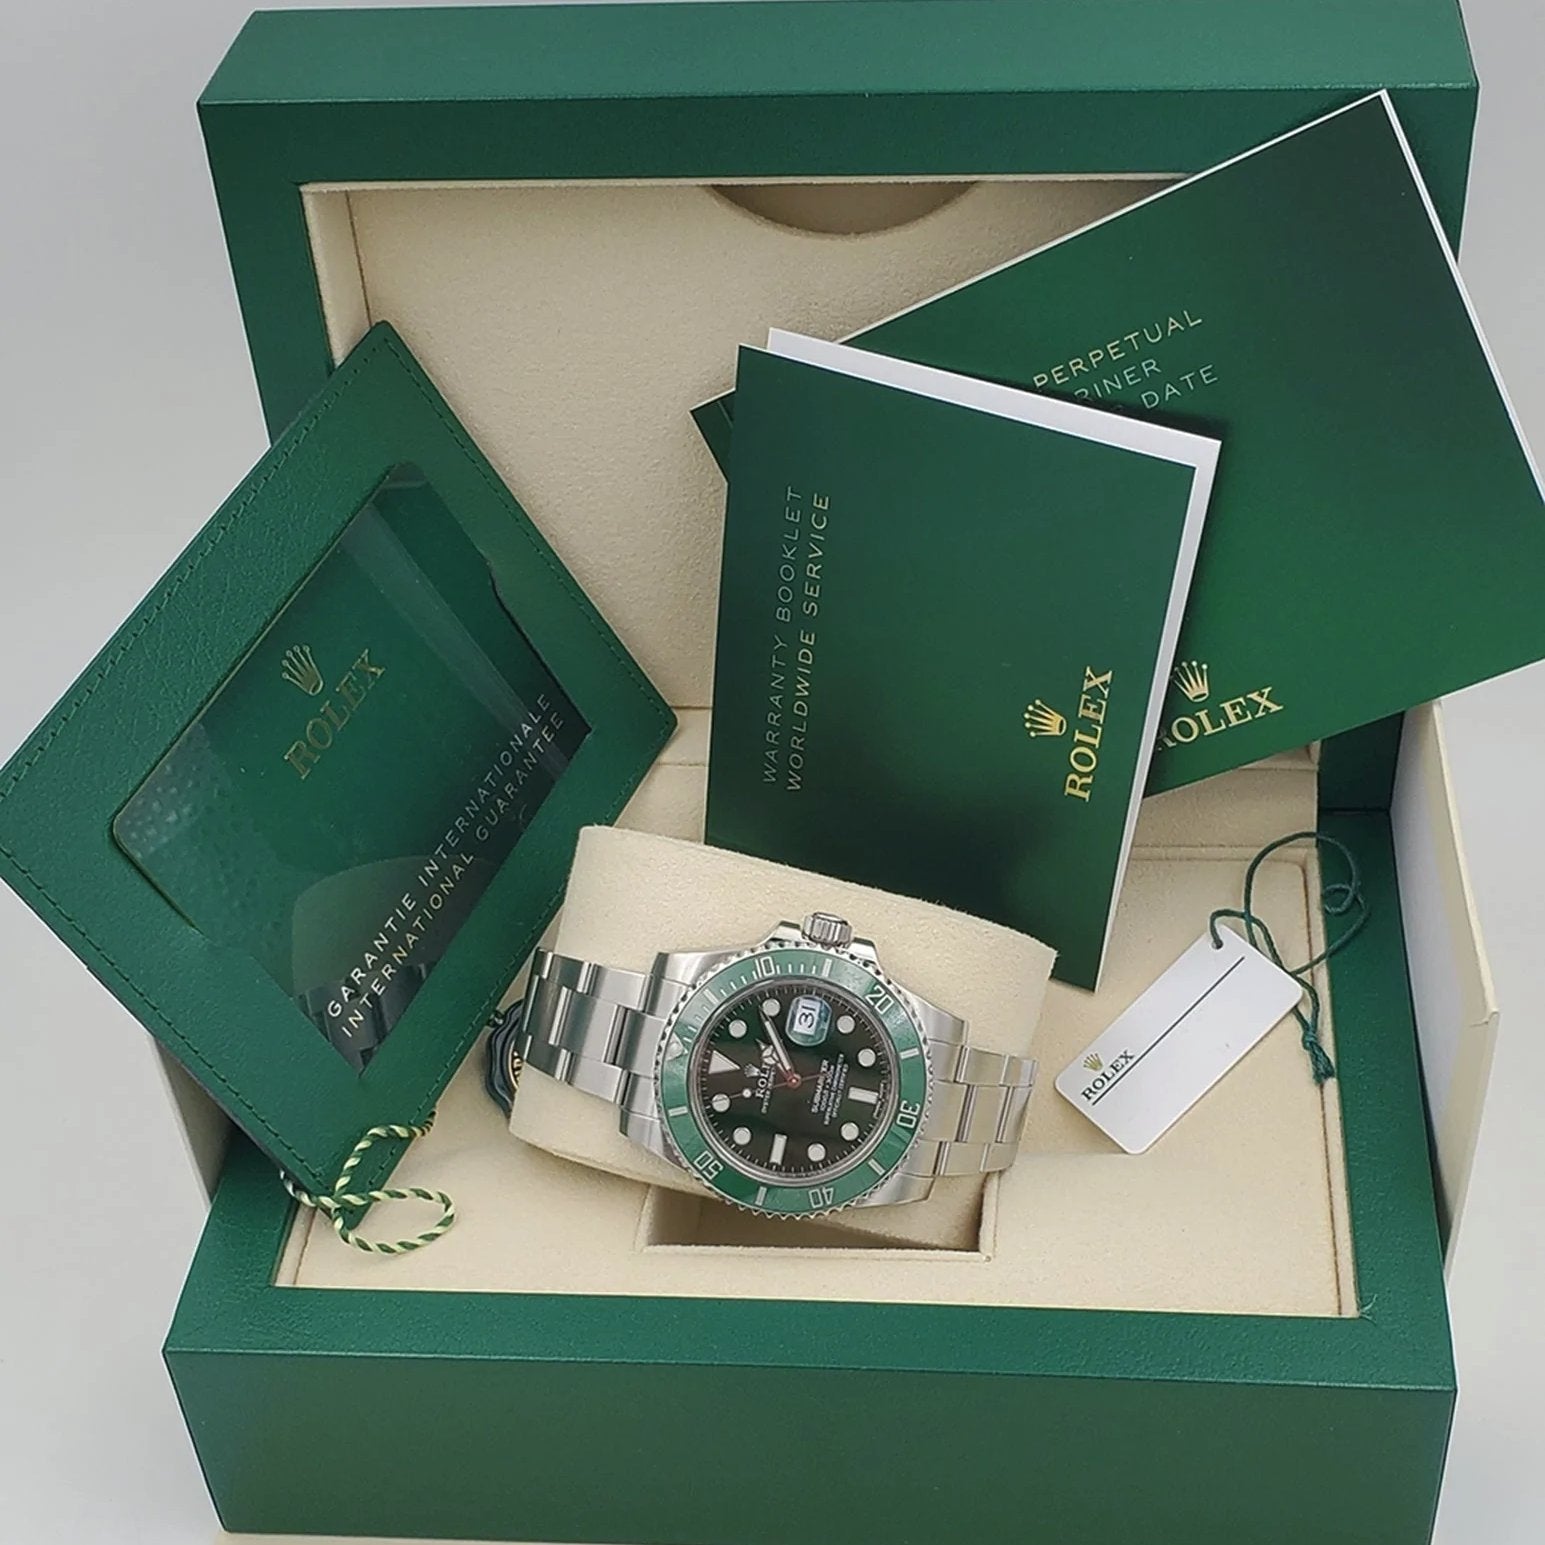 2015 Men's Rolex 40mm Submariner "Hulk" Oyster Perpetual Date Stainless Steel Watch with Green Dial and Green Bezel. (Pre-Owned 116610LV)